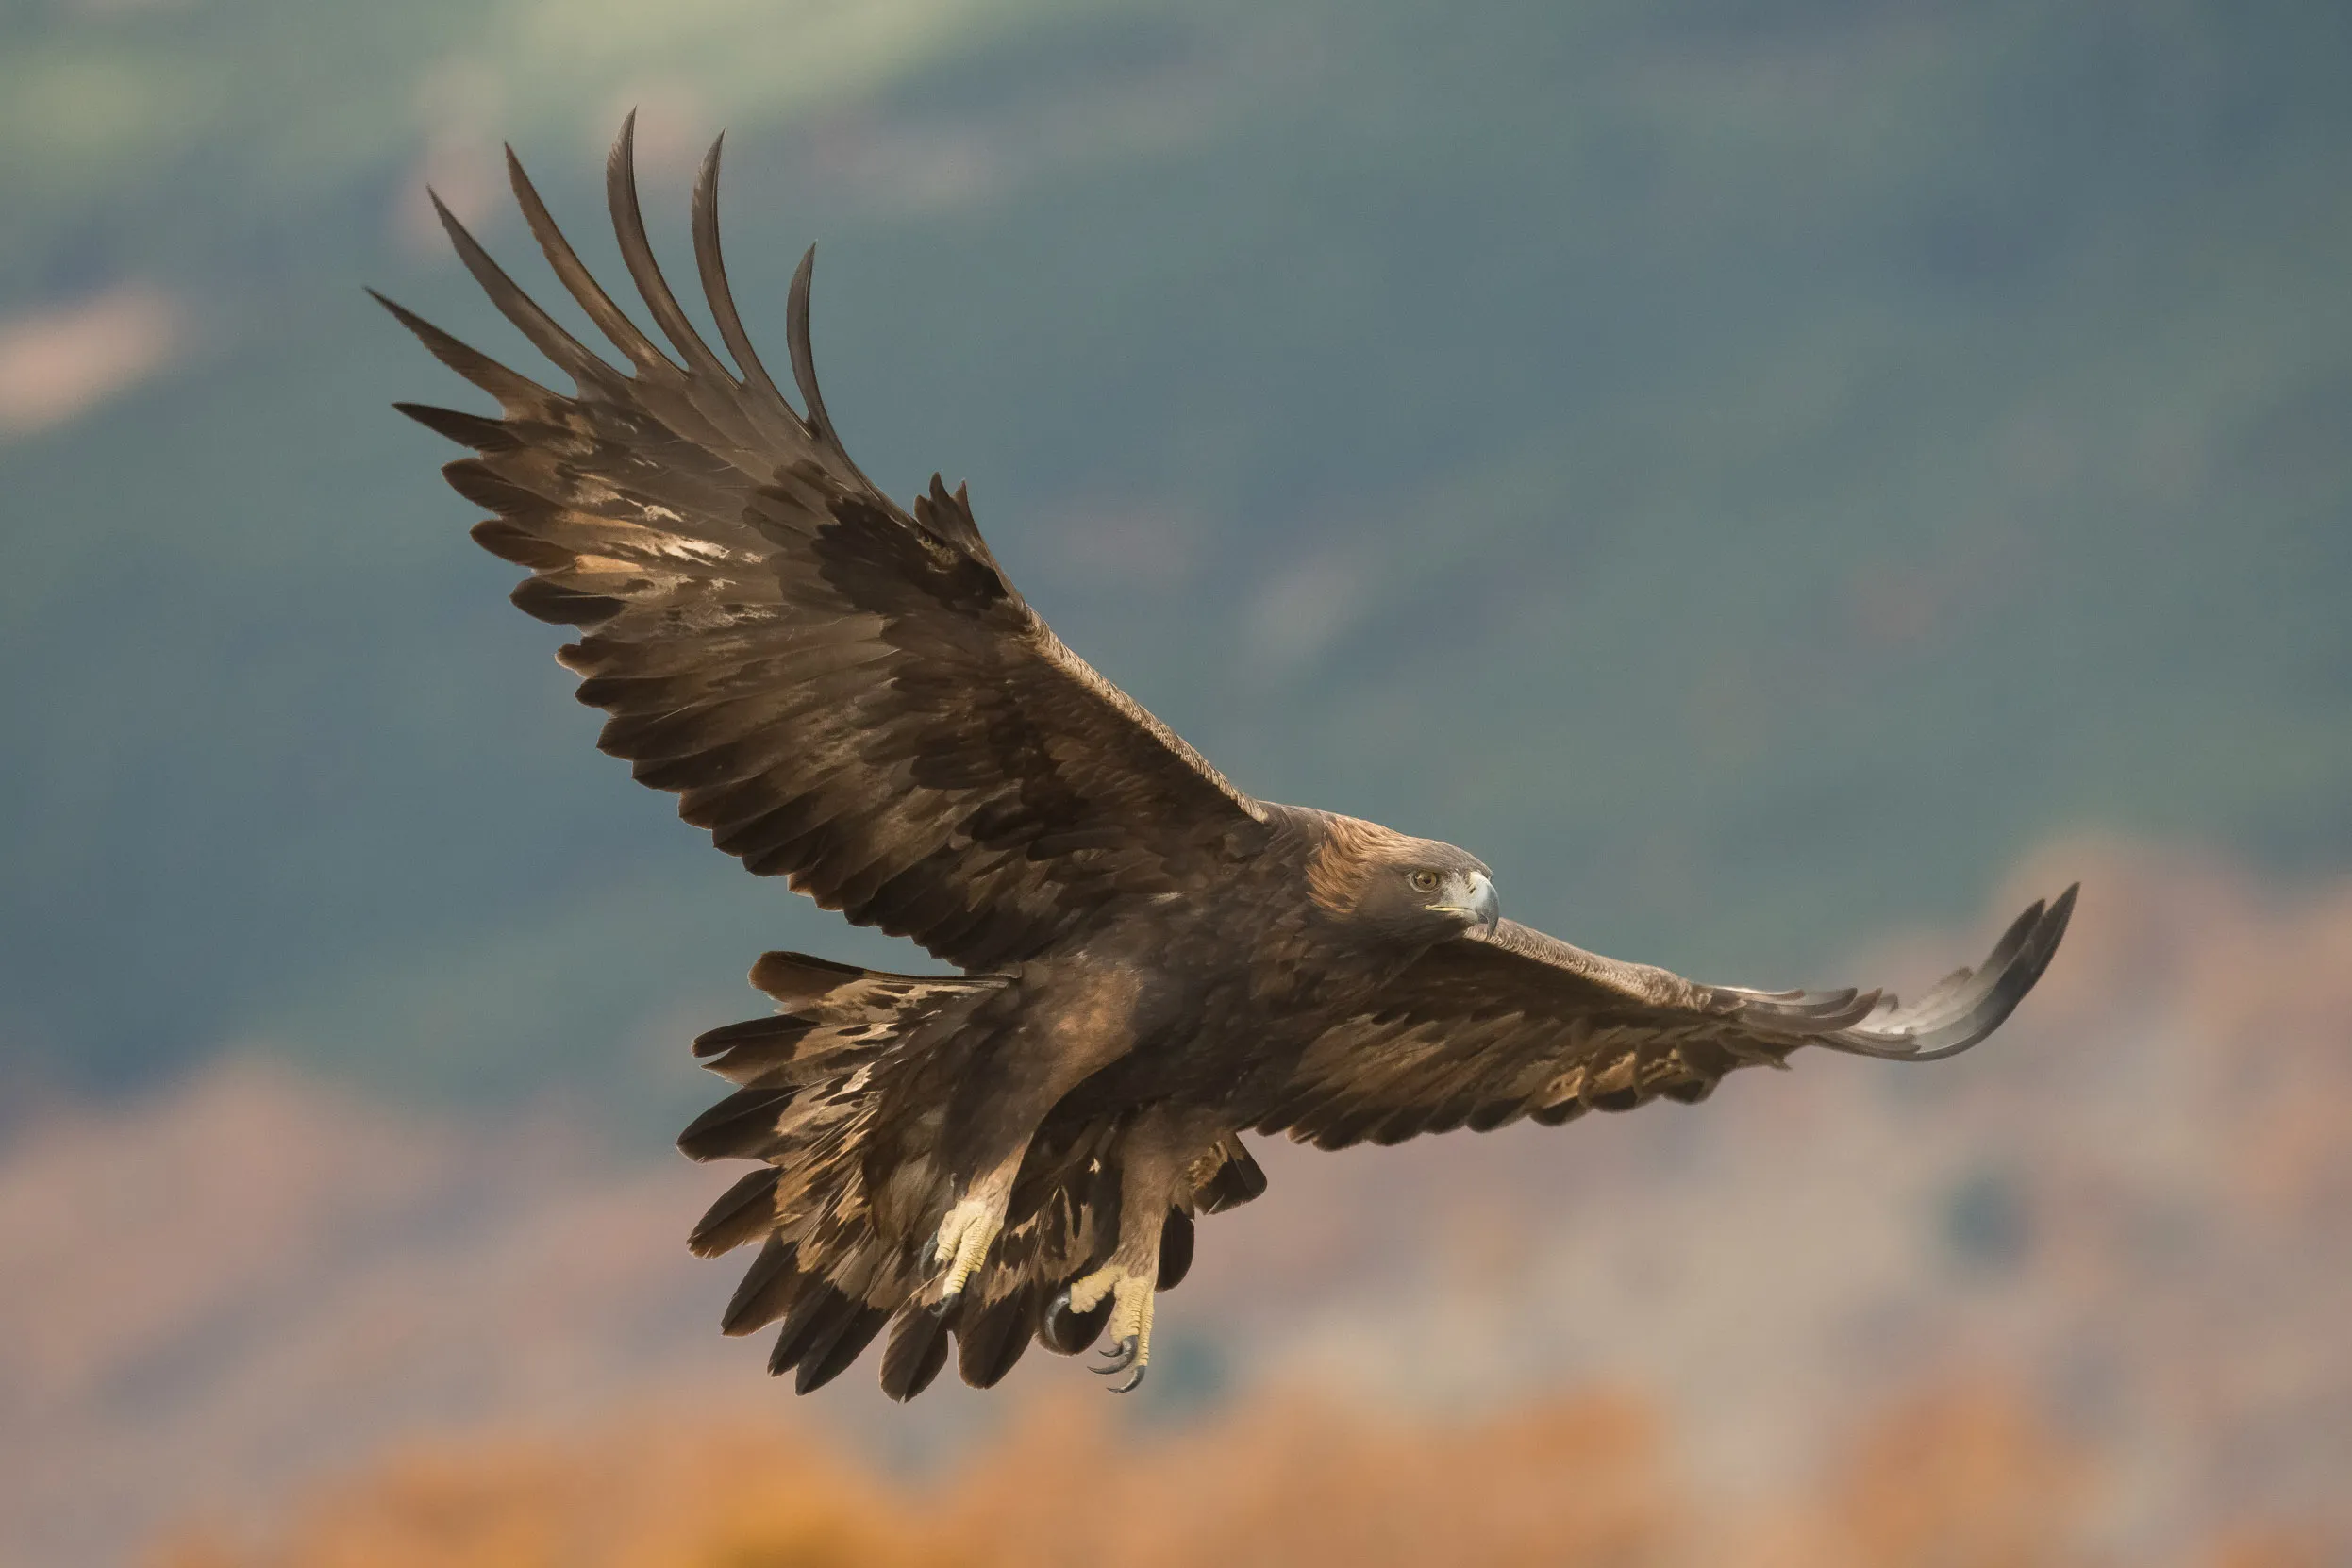 A Golden Eagle flying against a background of mountains.